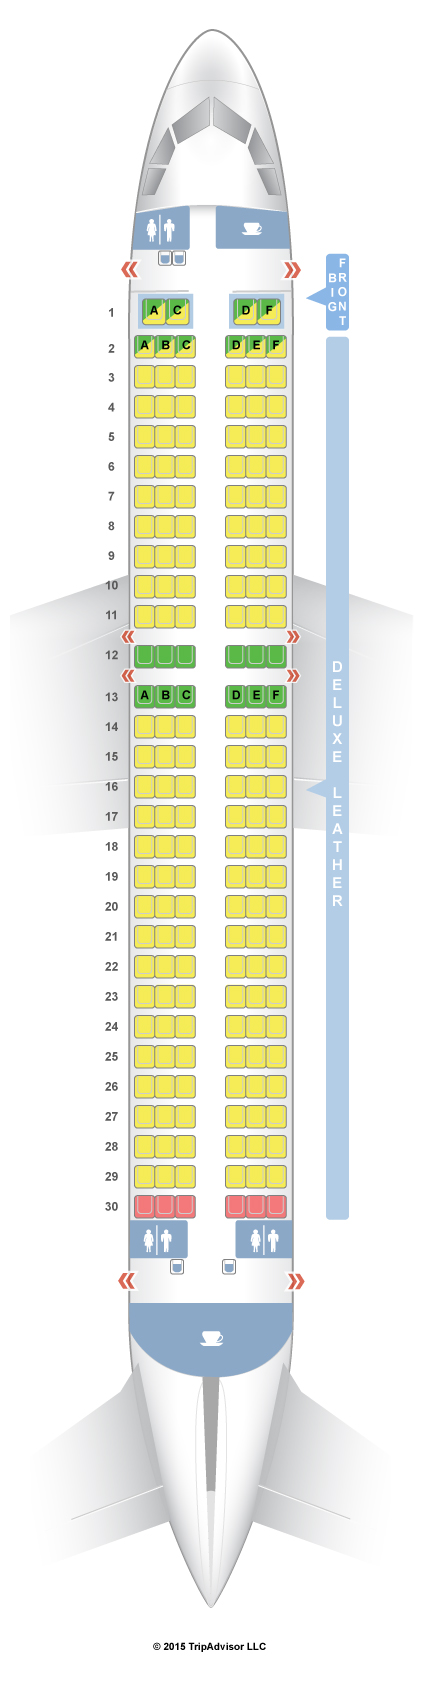 A320 Plane Seating Chart